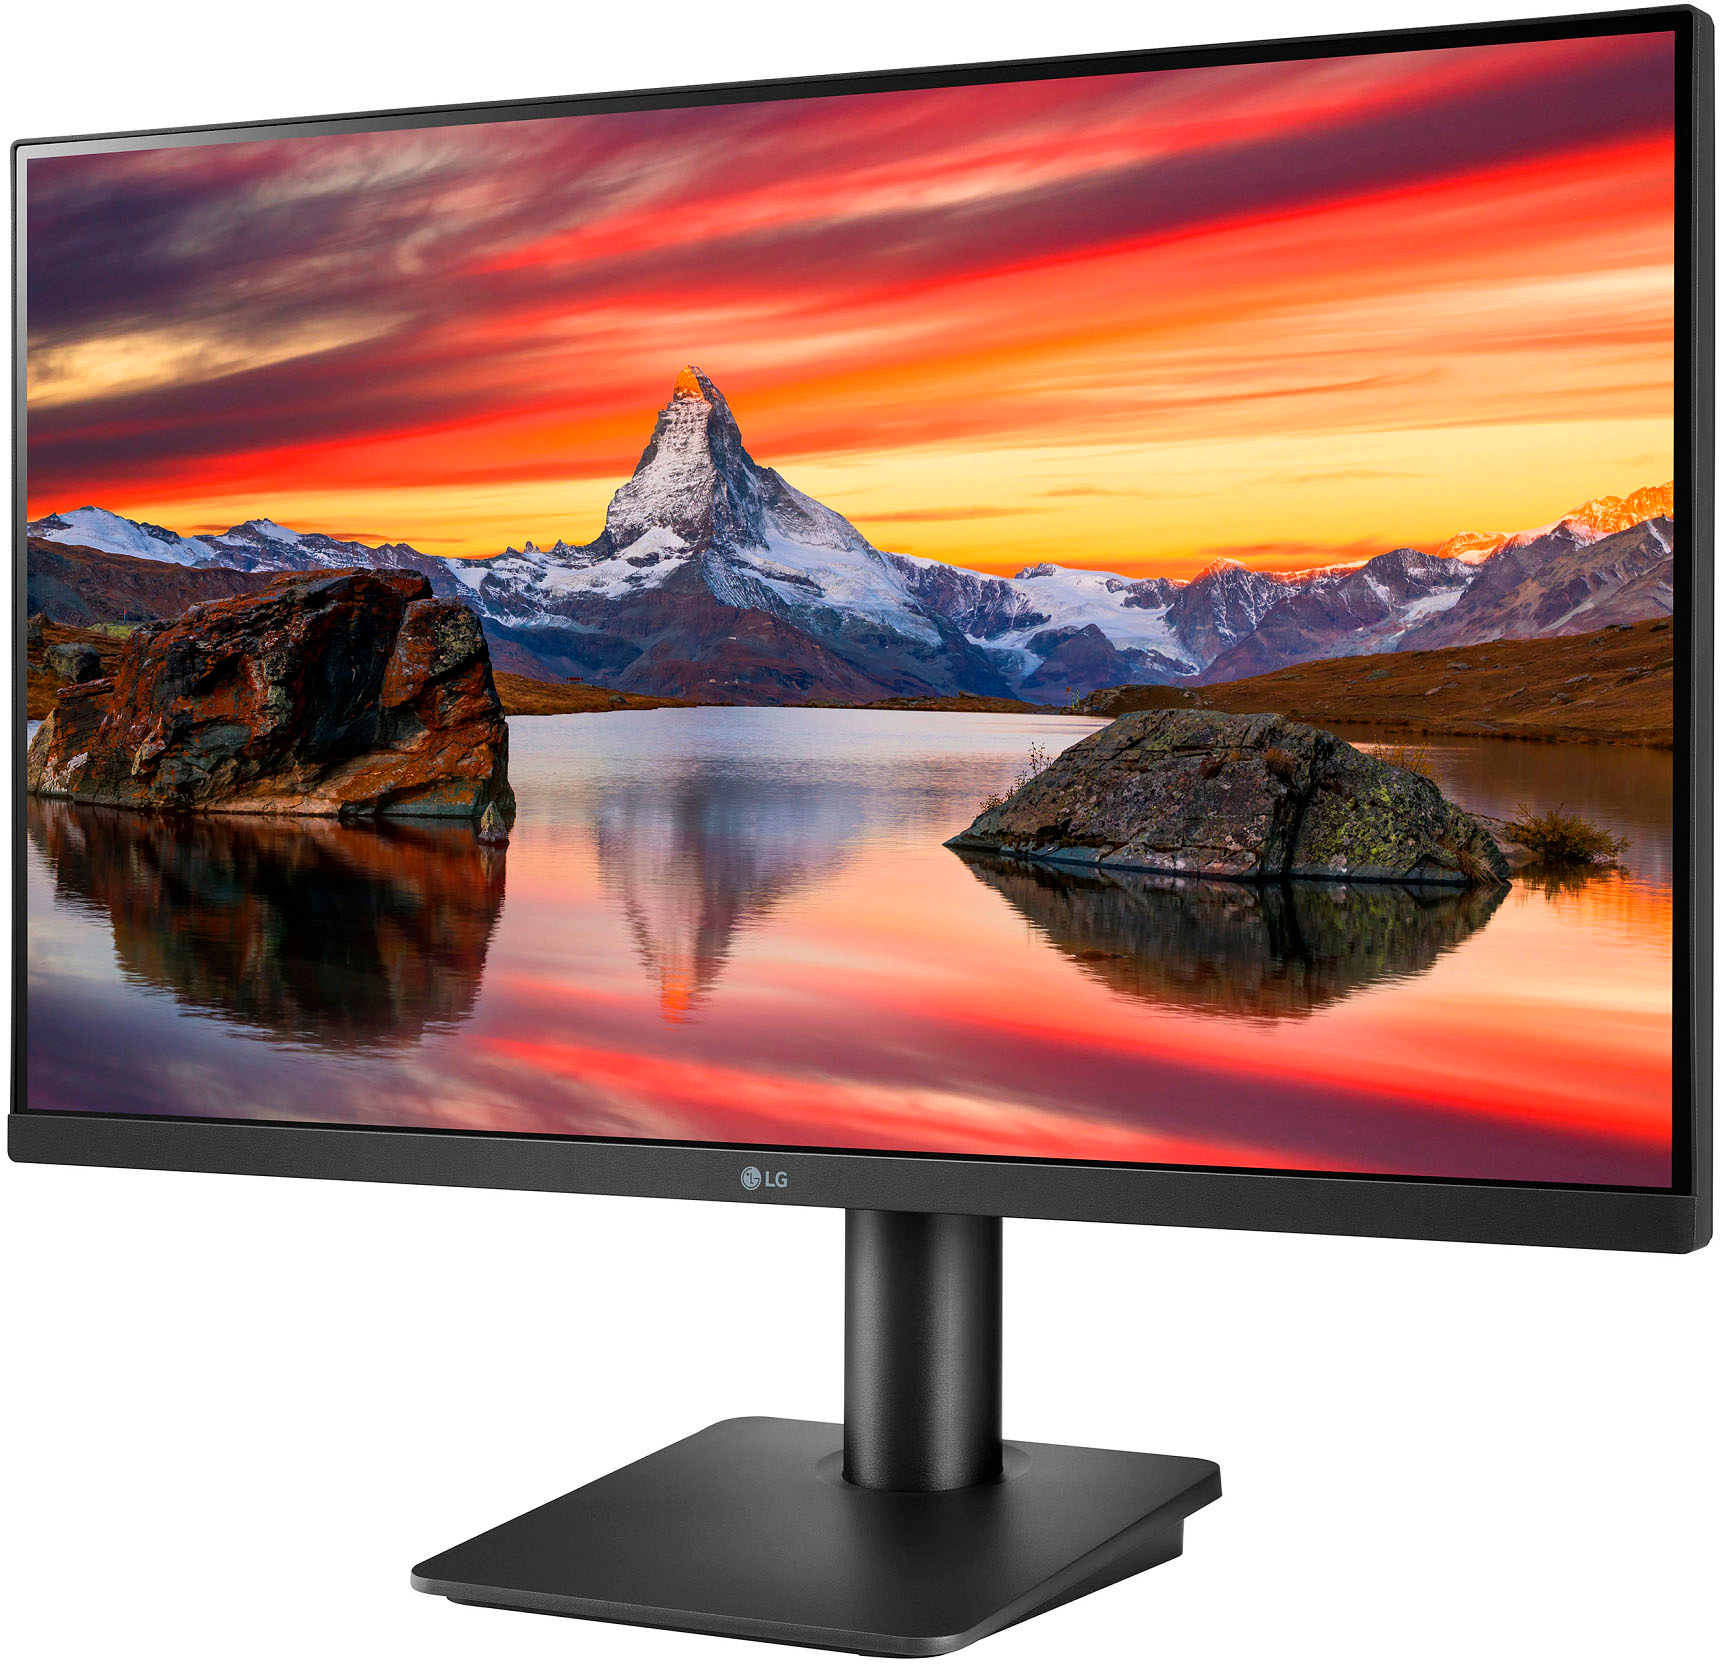 Left View: Samsung - A650 Series 34" LED 1000R Curved WQHD FreeSync Monitor with HDR - Black